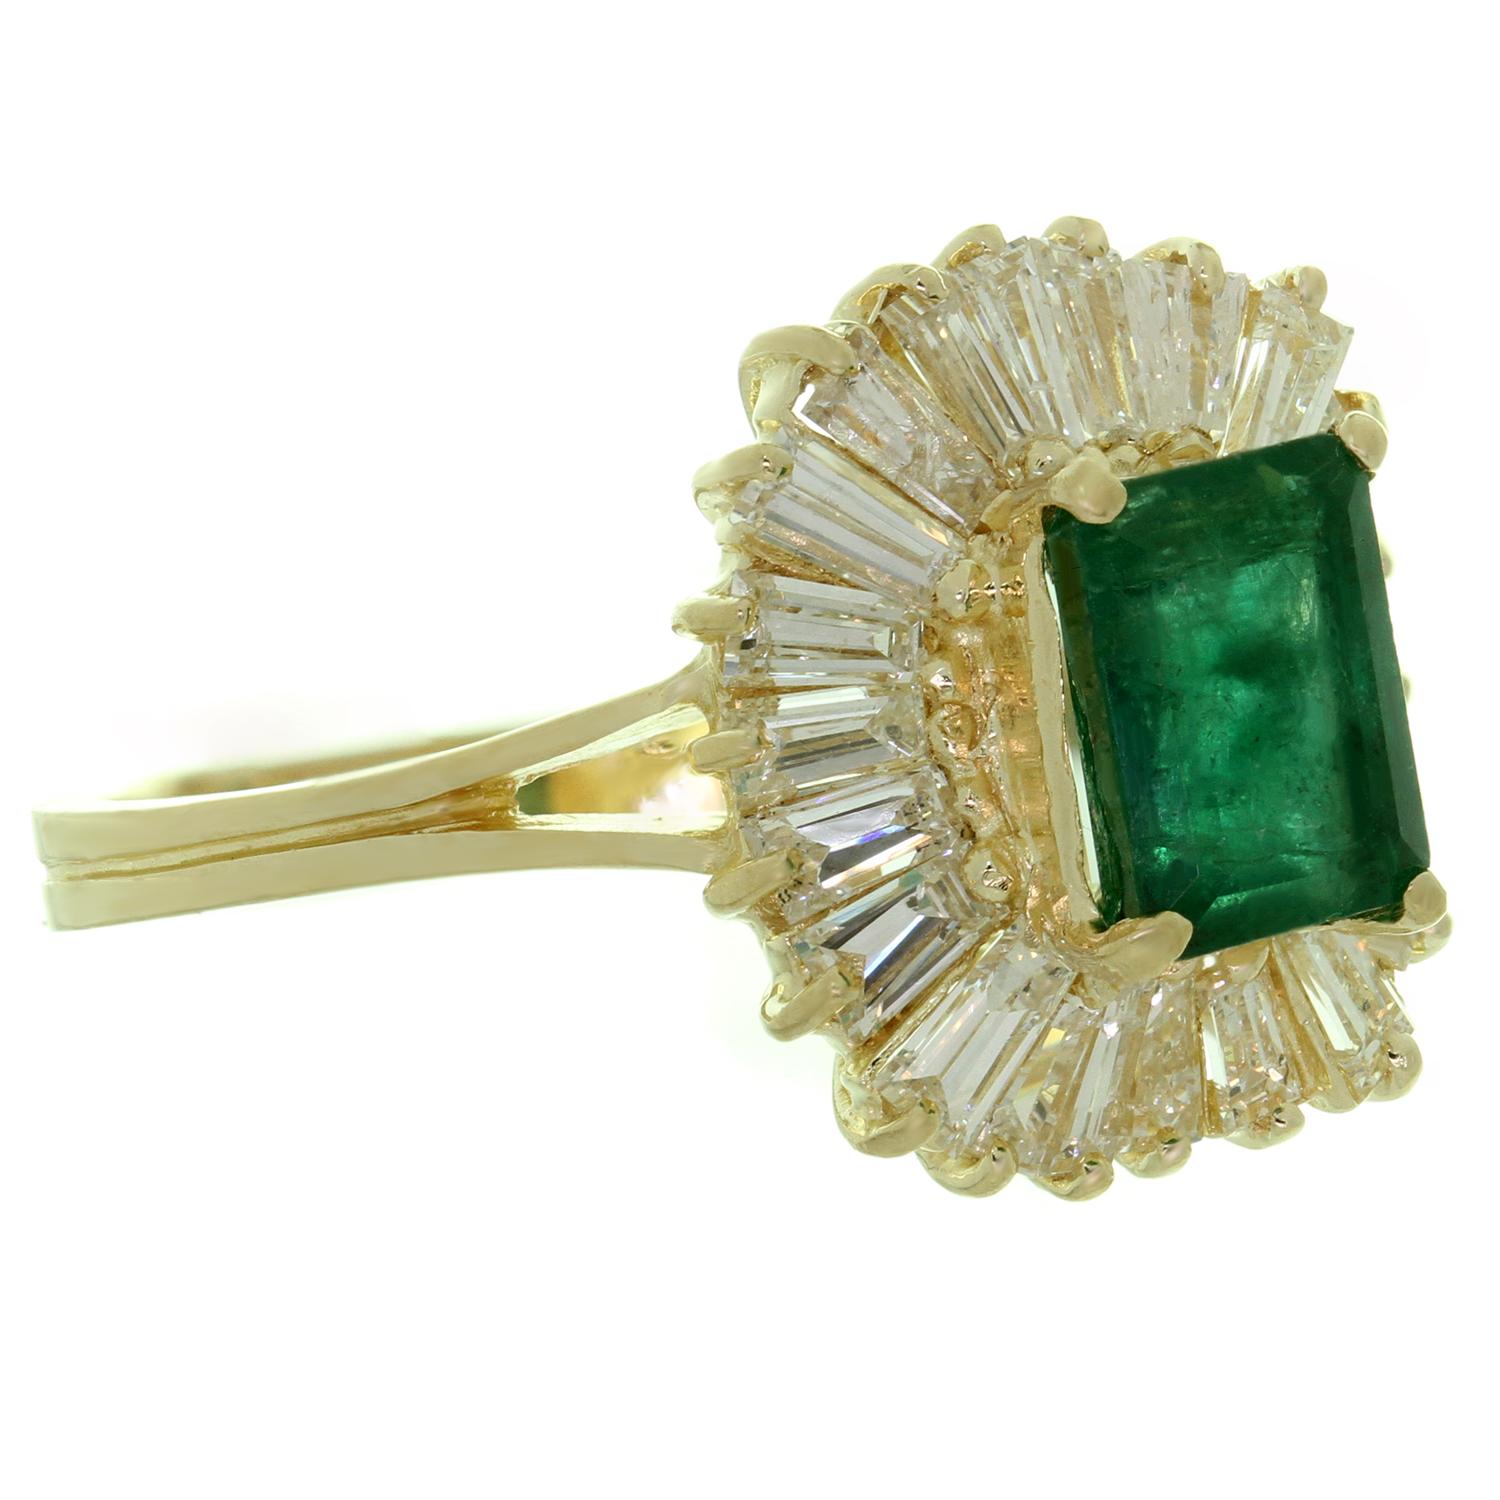 This classic estate ballerina cocktail ring is crafted in 14k yellow gold and set with with a genuine emerald-cut green emerald approximately 1.50 carat,  in suturated deep green color surrounded with baguette-cut diamonds weighing an estimated 1.55